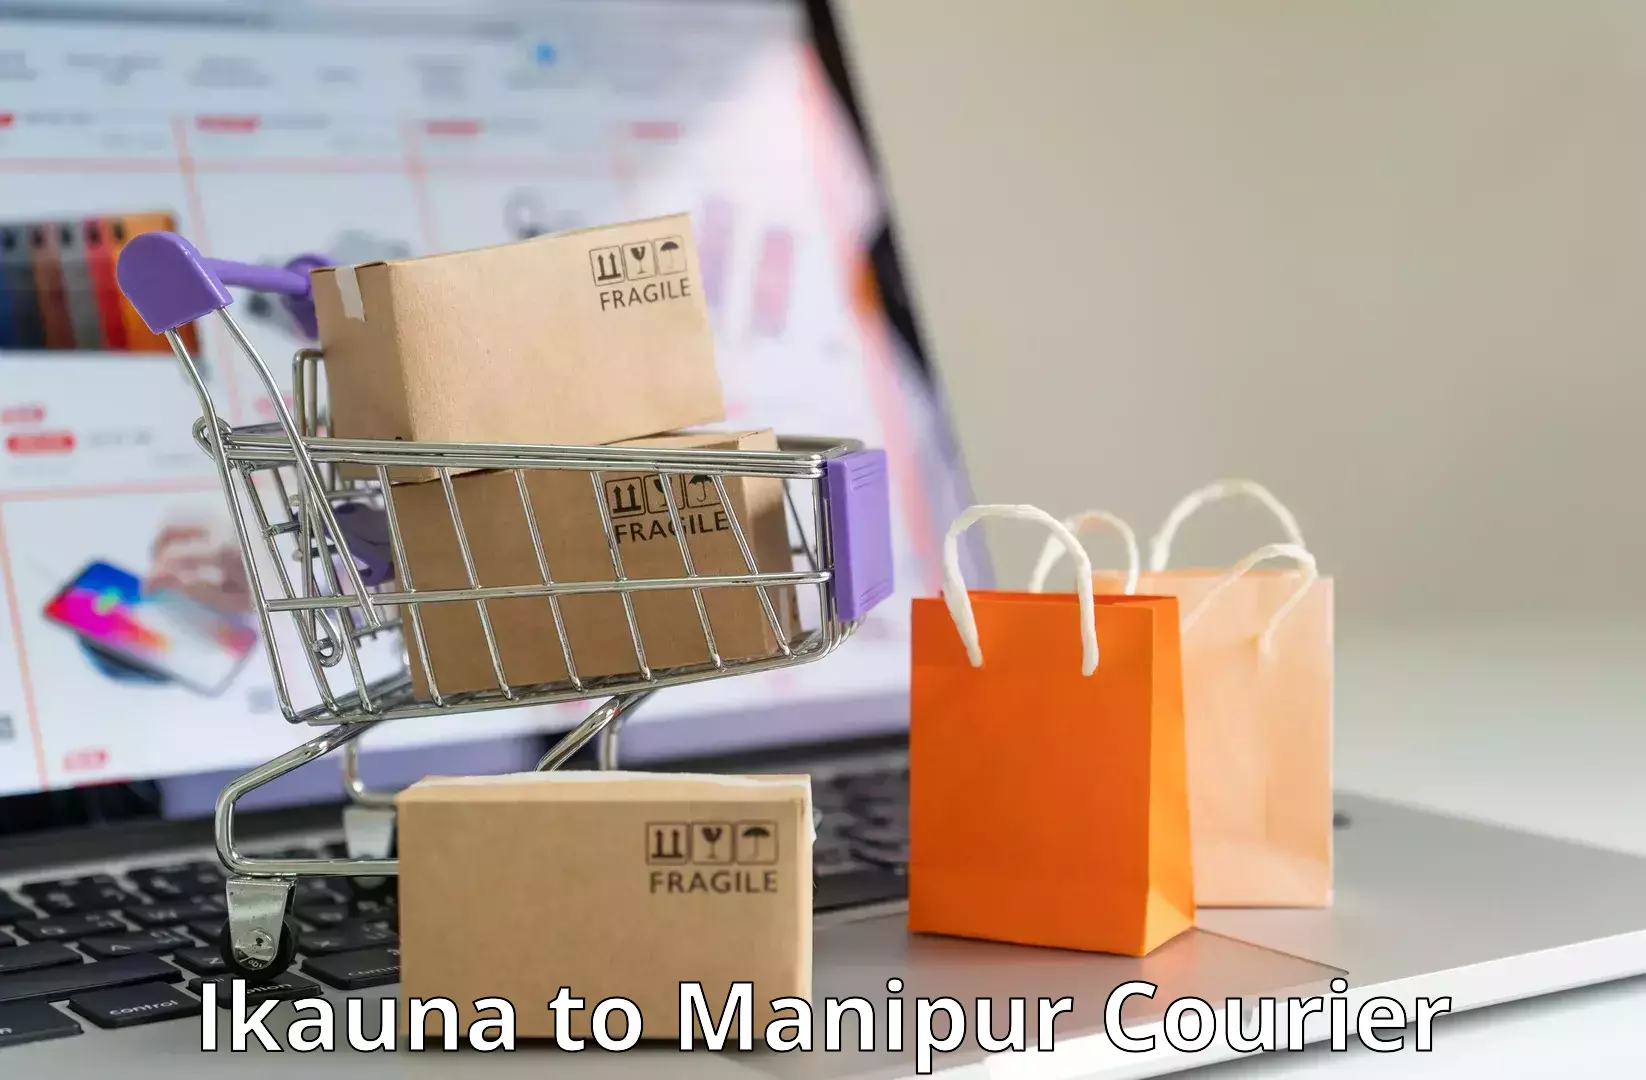 Customizable delivery plans in Ikauna to Imphal